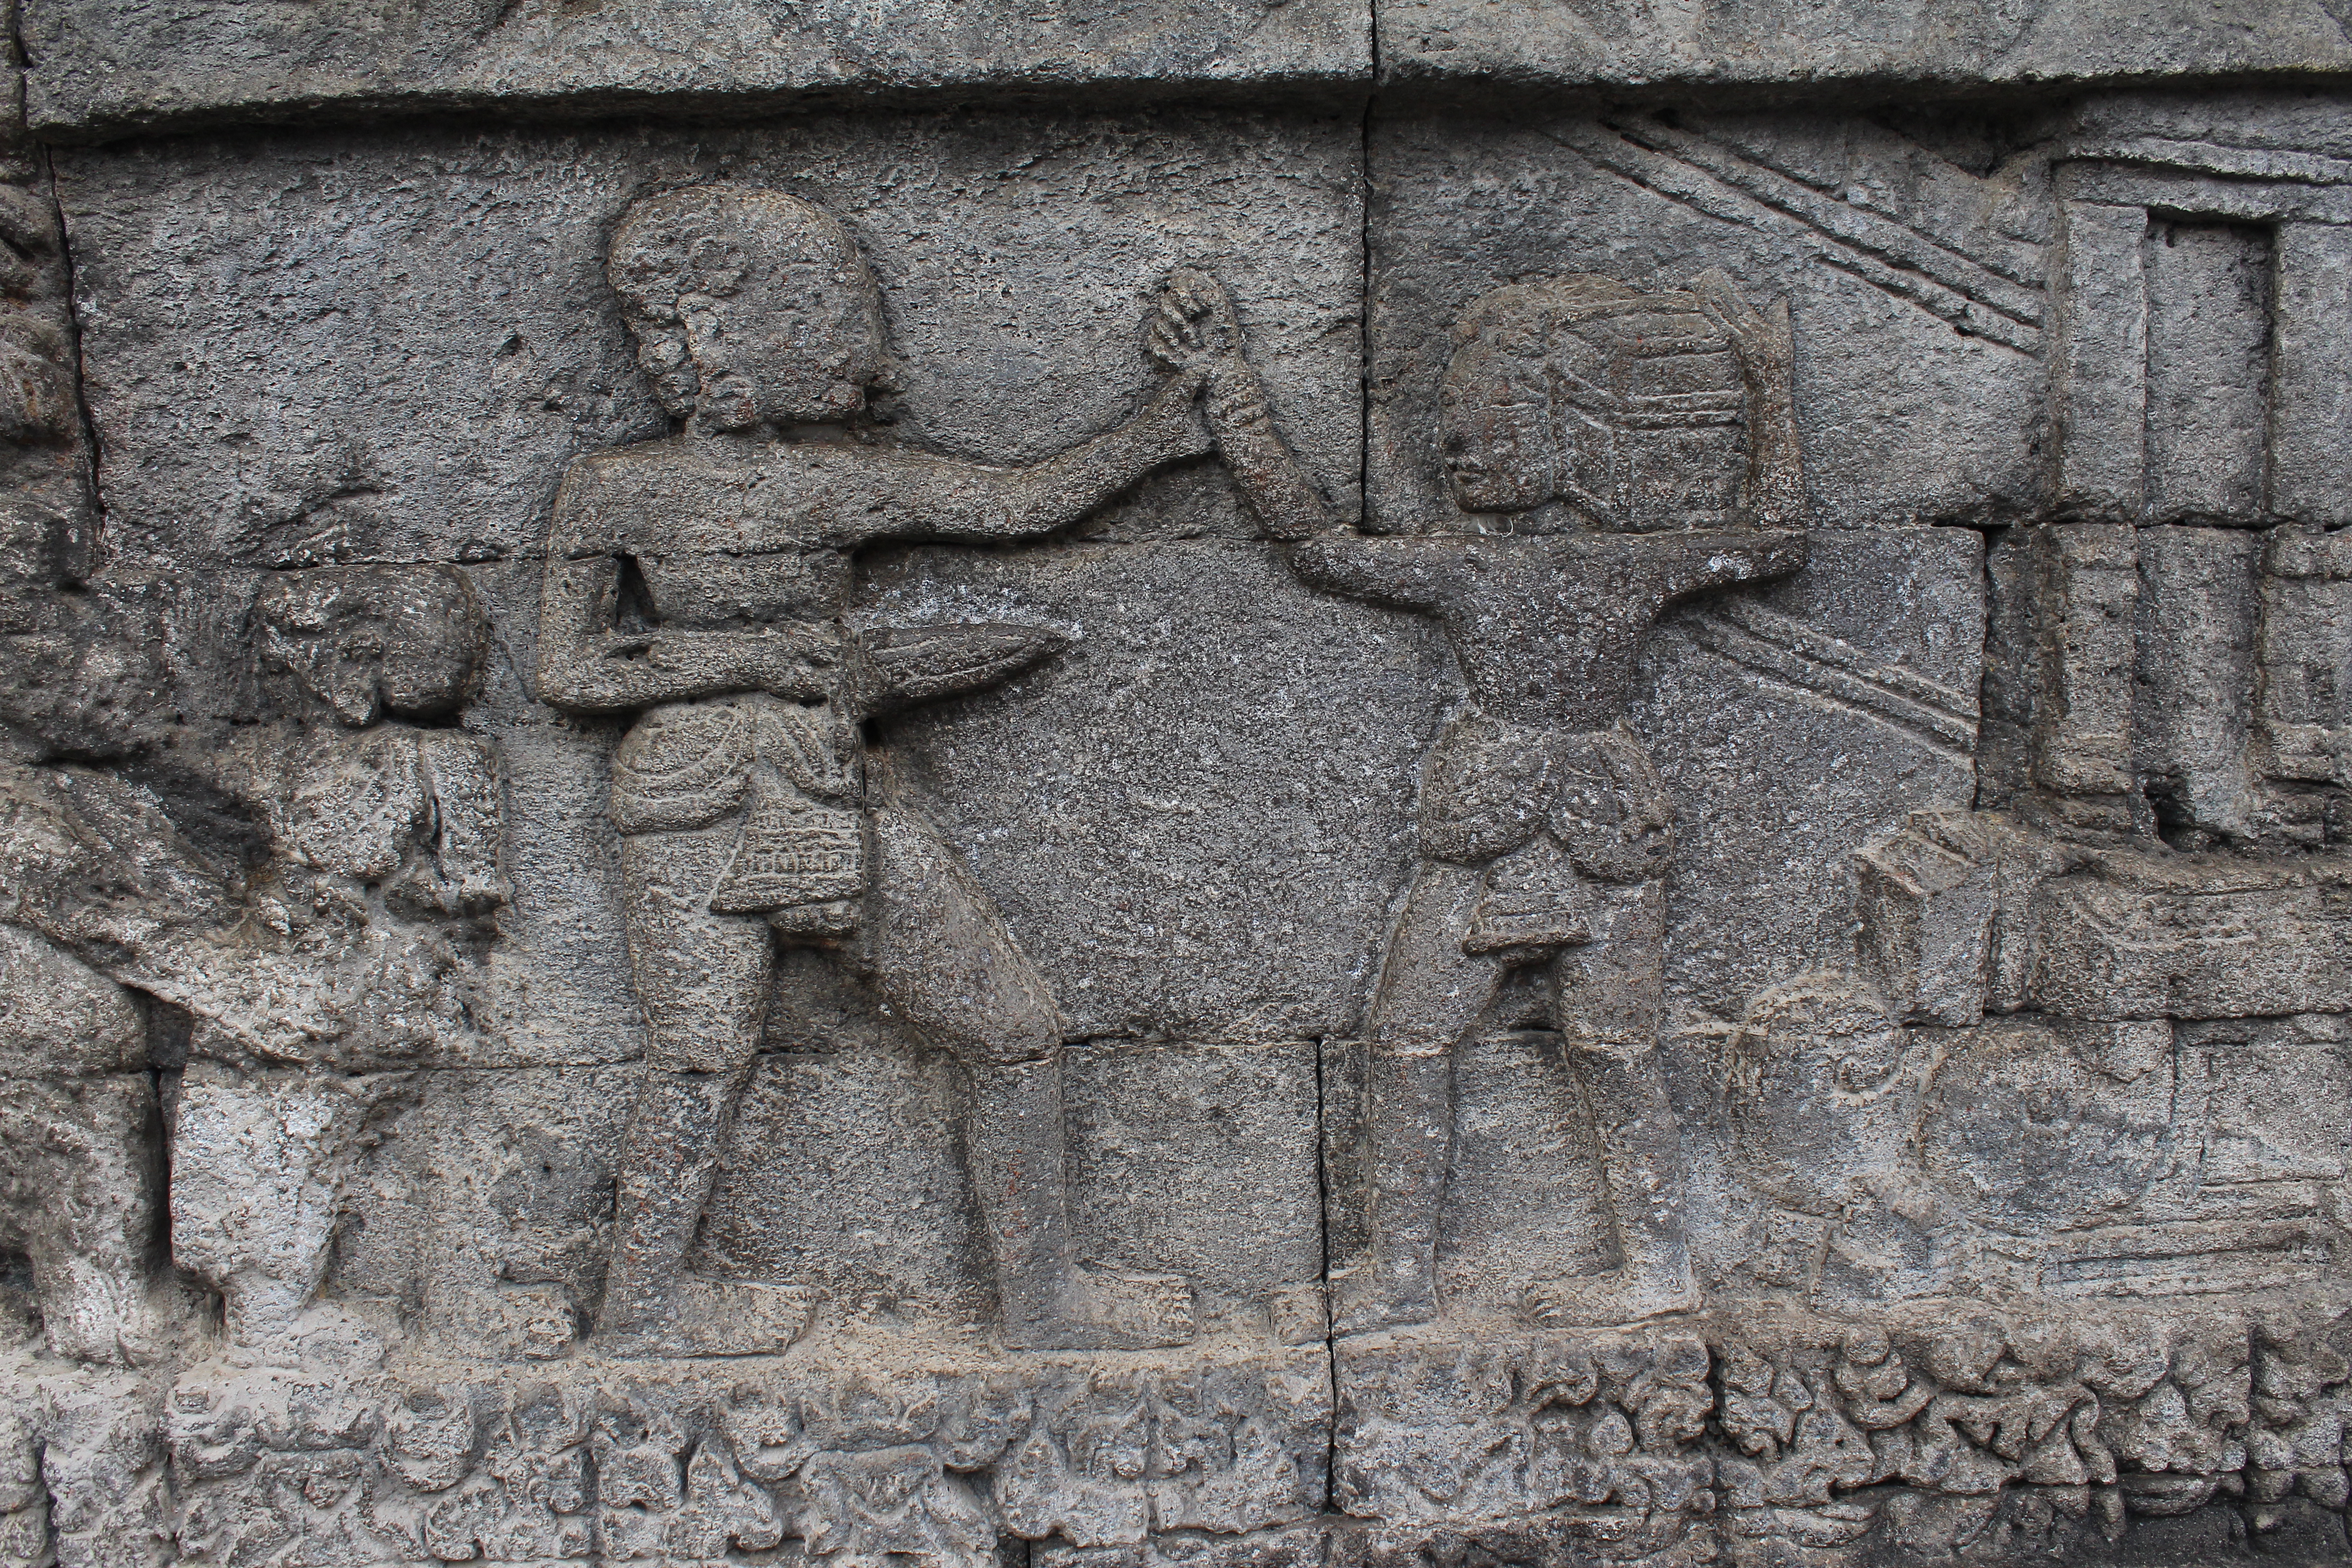 Relief showing two people fighting